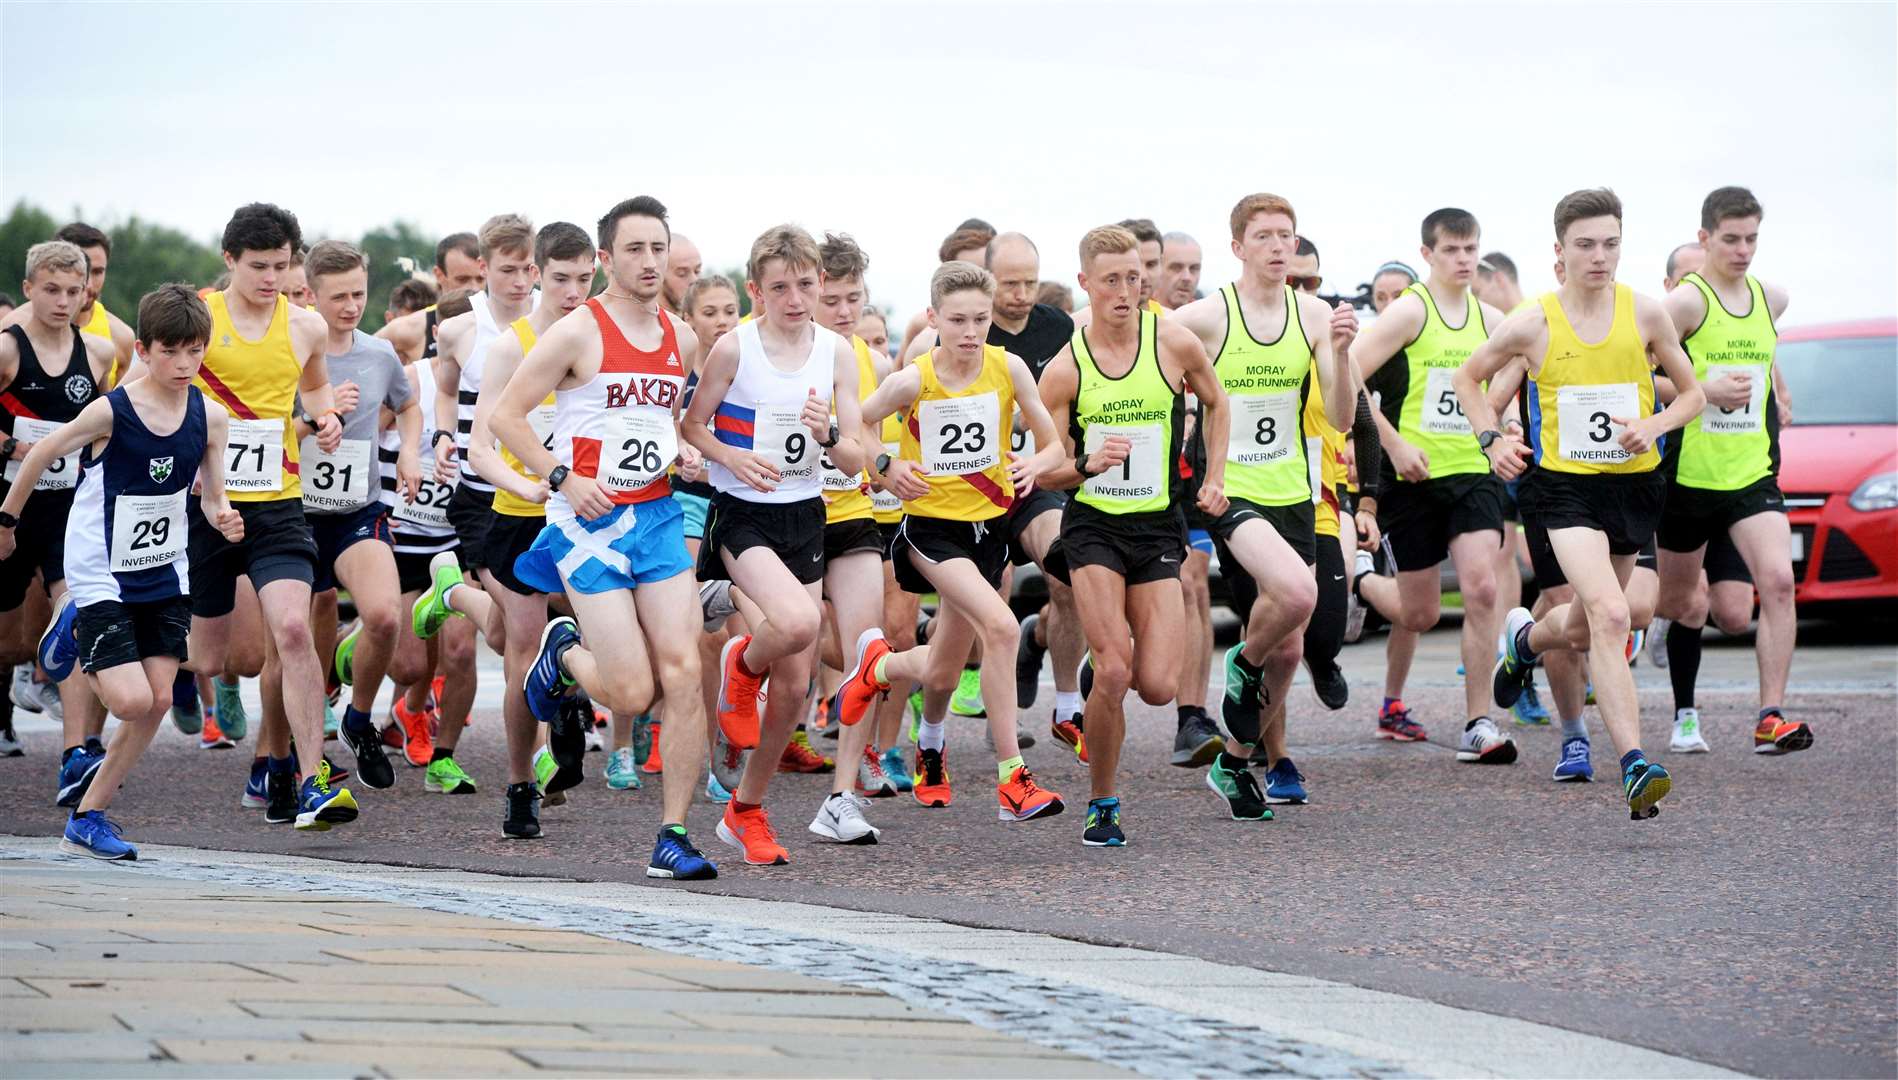 The start of the 5K 'A' race....Inverness Campus Road Race.Picture: Gair Fraser. Image No. 044415..